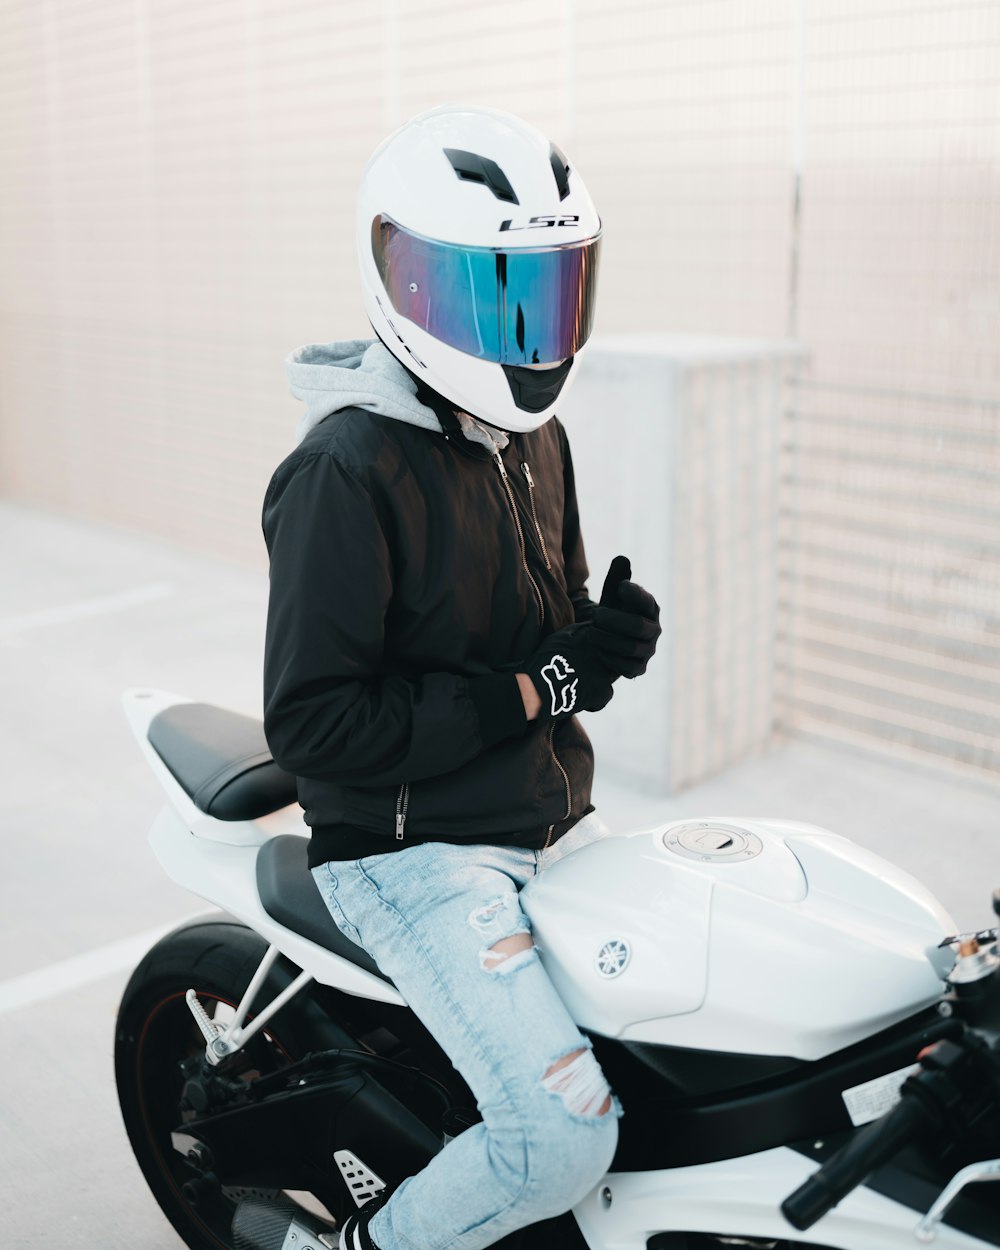 man in black jacket and blue denim jeans wearing white helmet sitting on white motorcycle during